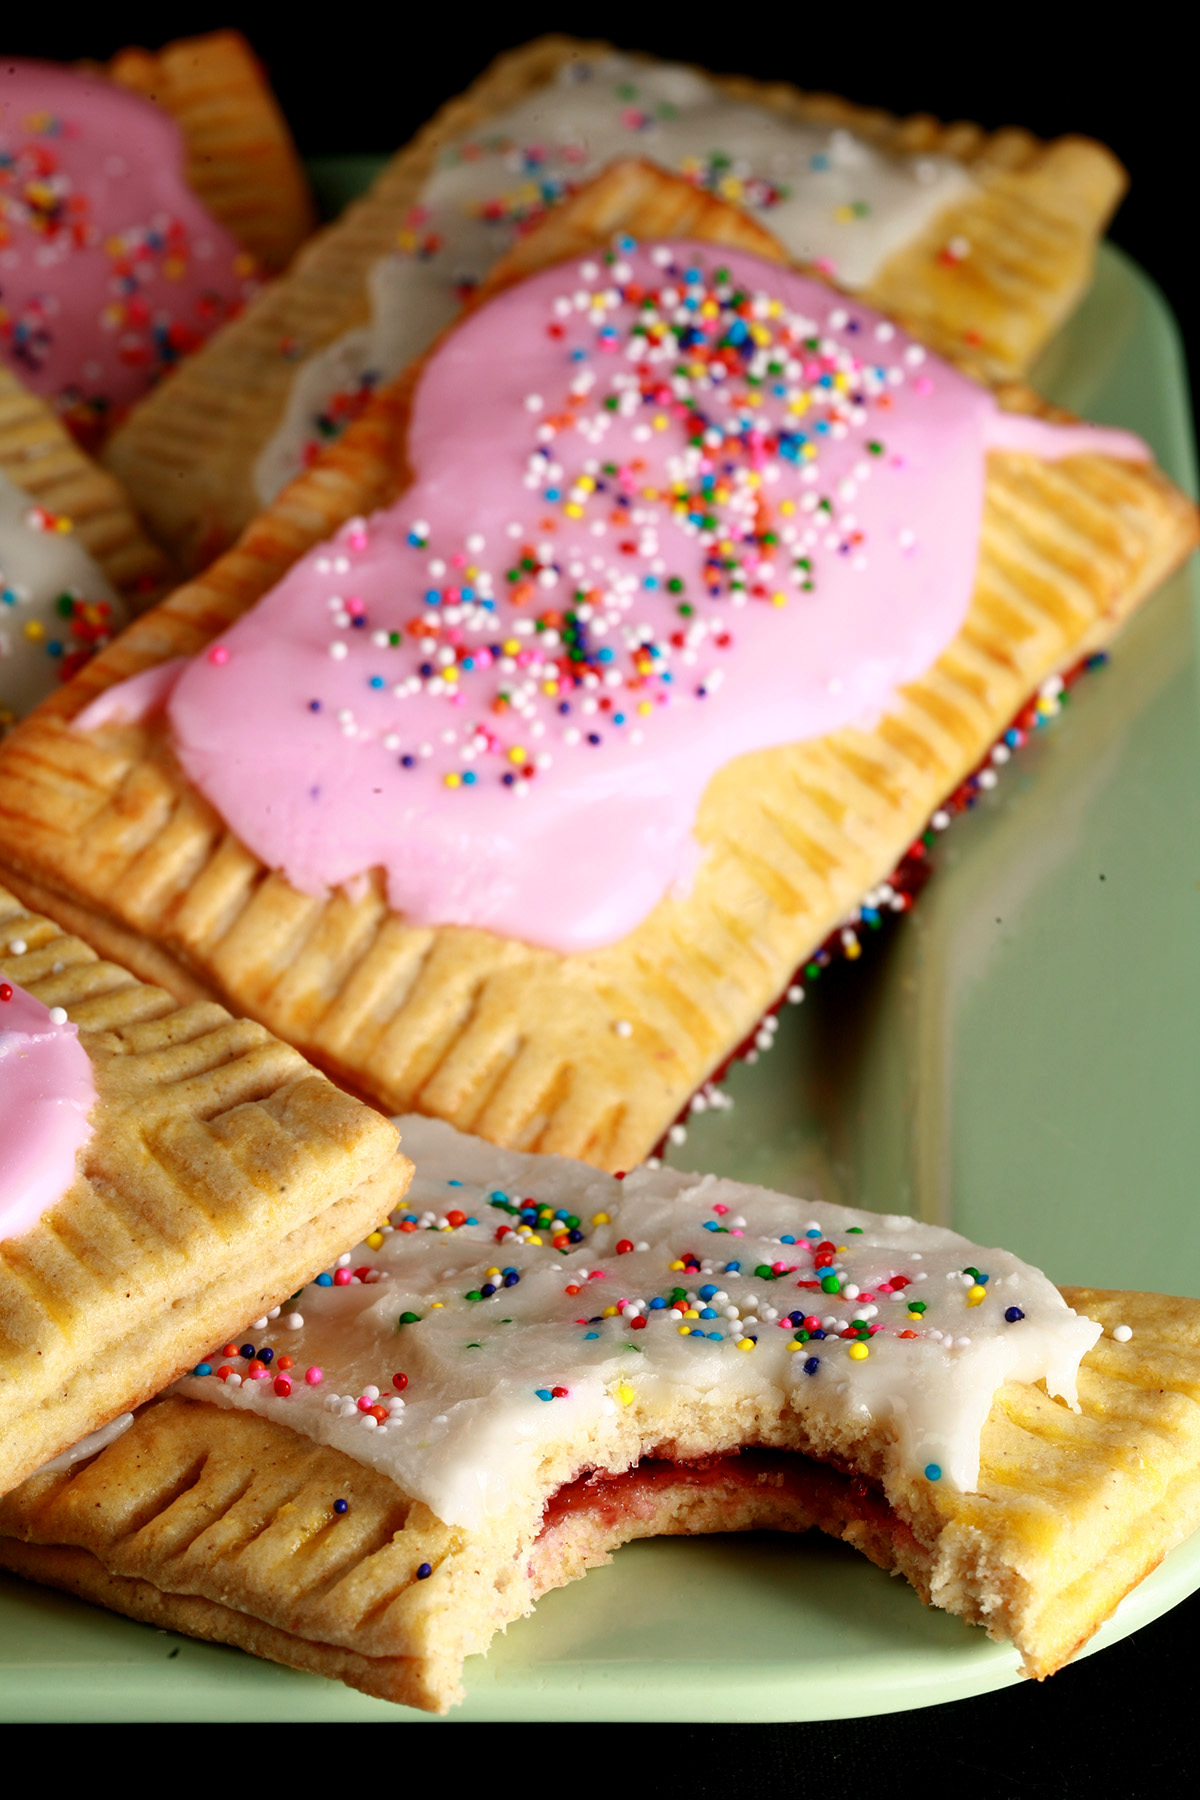 A plate of homemade gluten-free poptarts, frosted with pink and white icing, topped with coloured sprinkles.